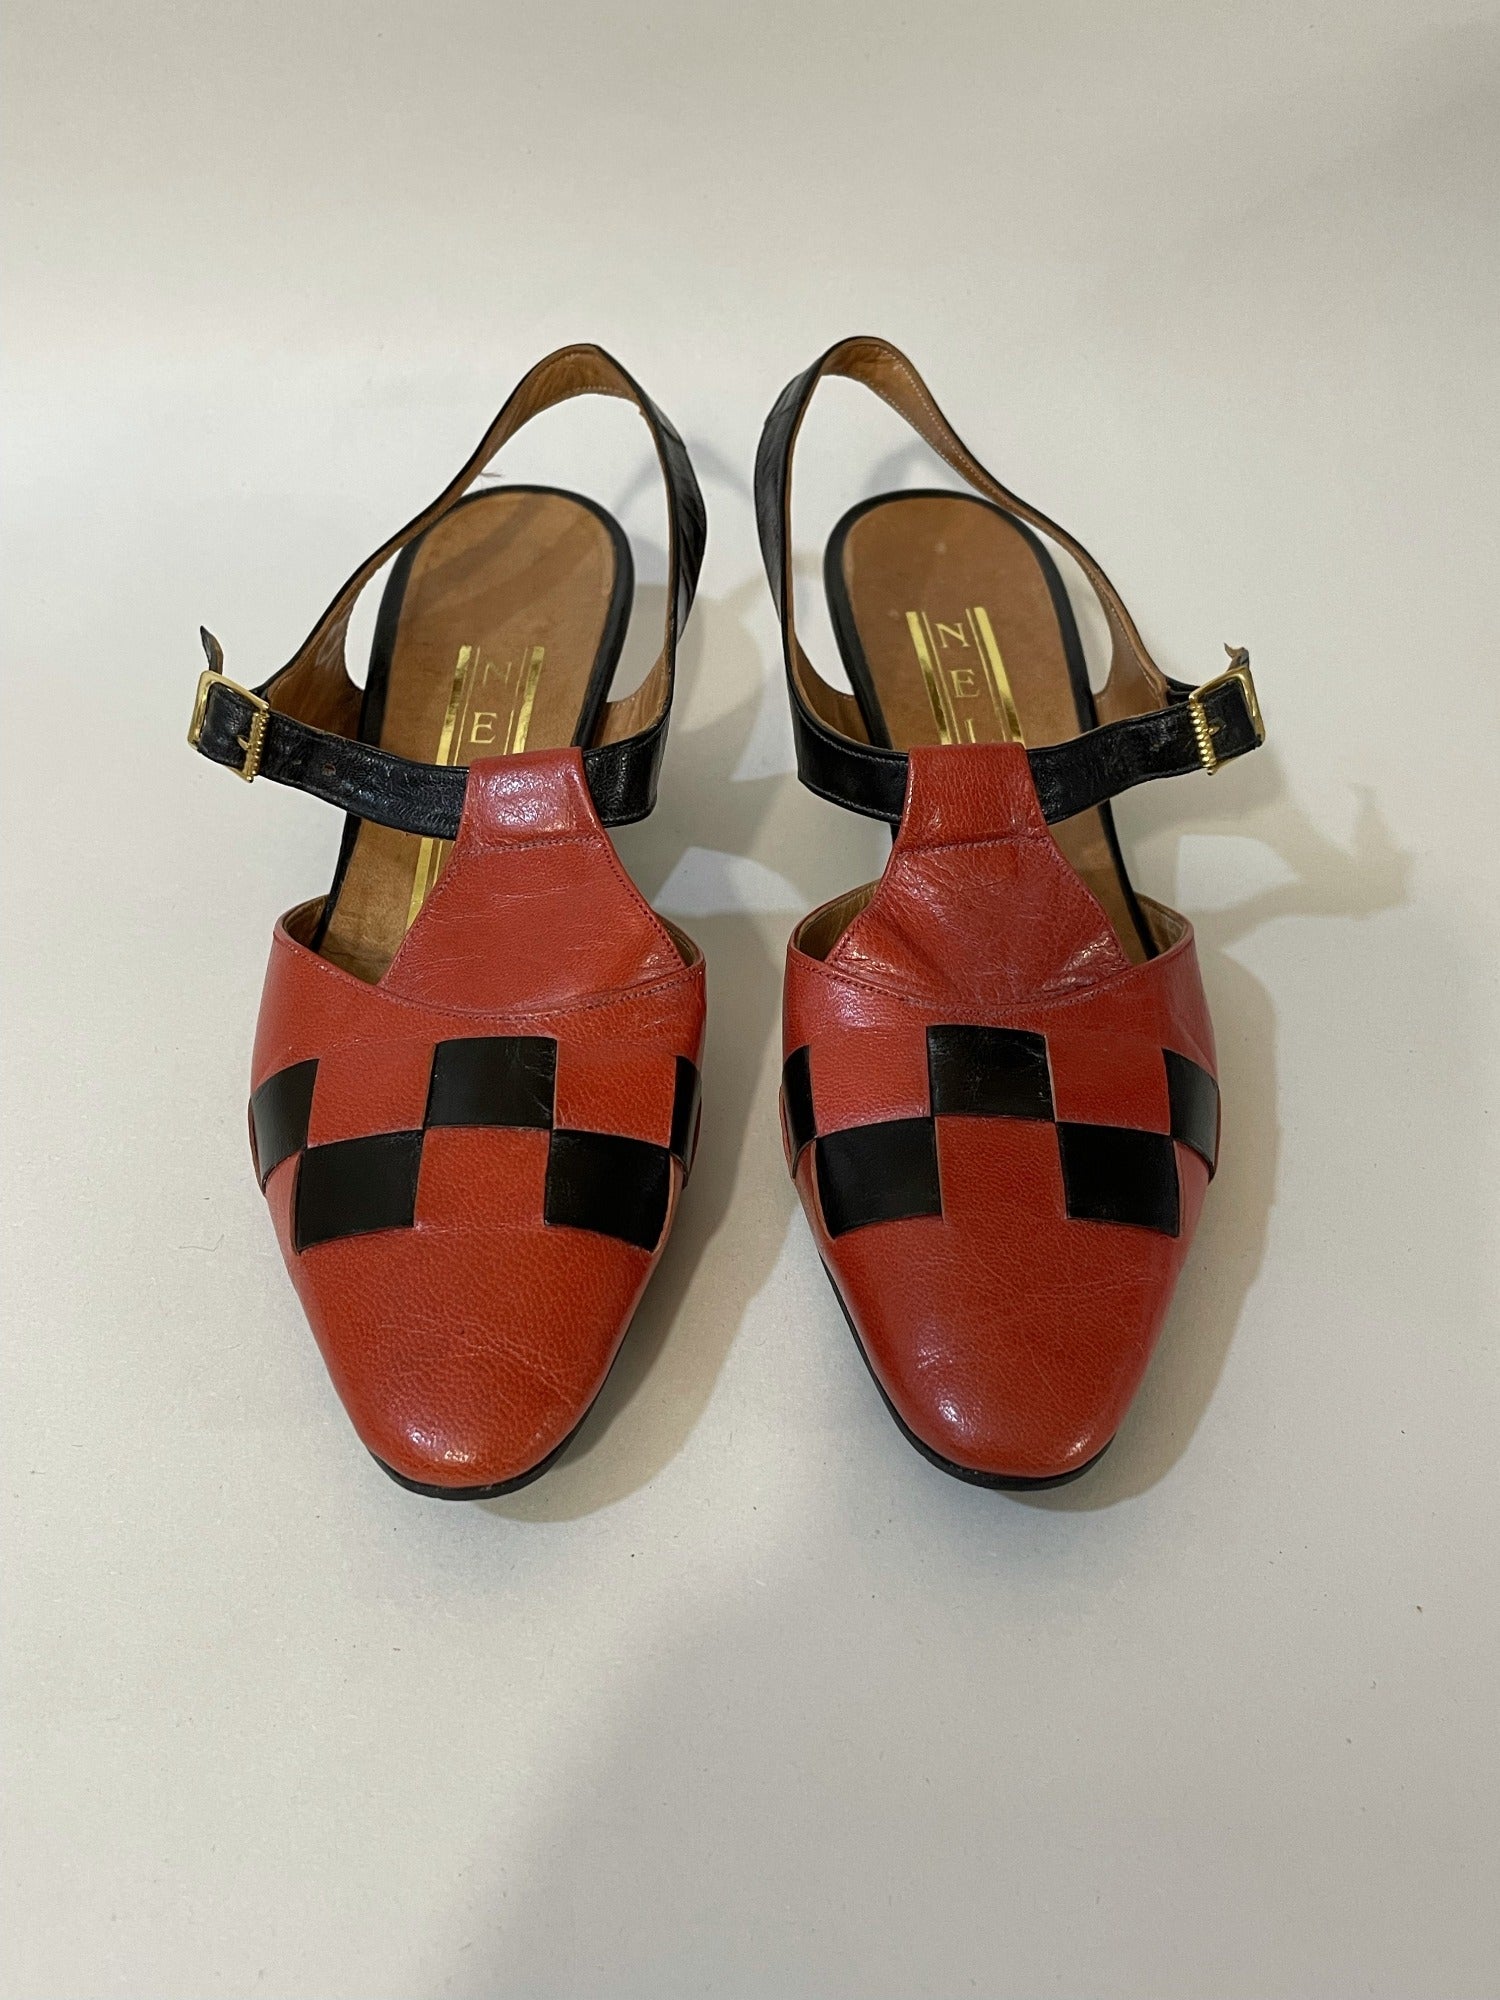 mod shoes  womens  vintage  Urban Village Vintage  urban village  slingback  shoes  retro  red black  Red  pointed toe  modette  MOD  Leather  kitten heel  dolly  chequerboard  60s  1960s